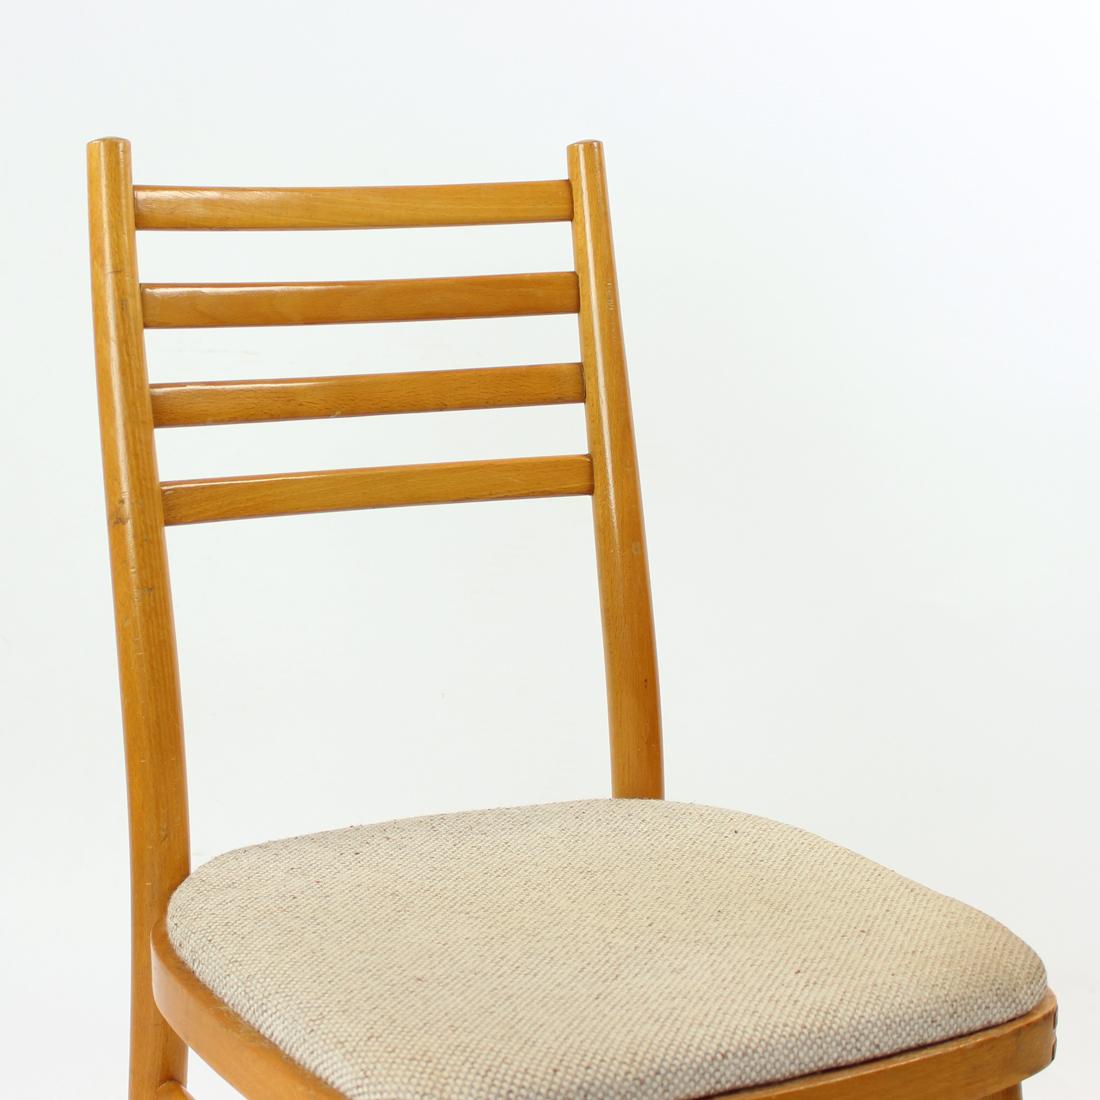 Midcentury Chair in Blond Wood, Czechoslovakia, 1960s For Sale 3